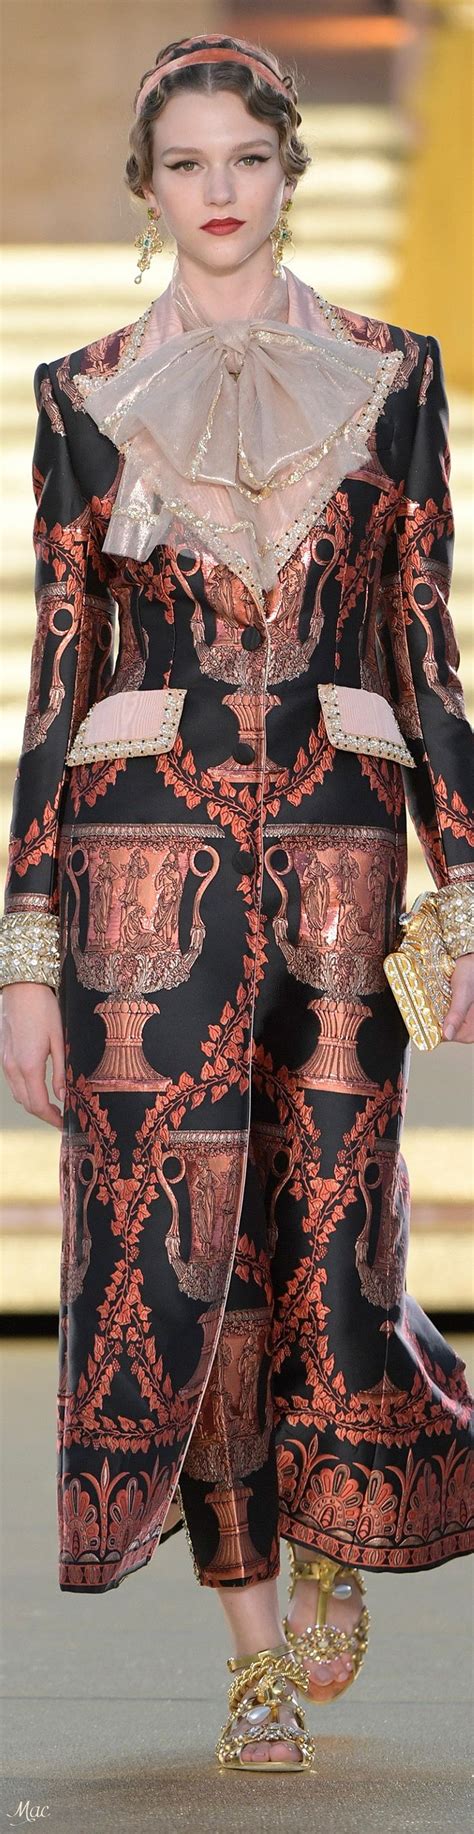 Dolce And Gabbana Fall 2019 Couture Fall2019 Fw2019 Couture Dolce